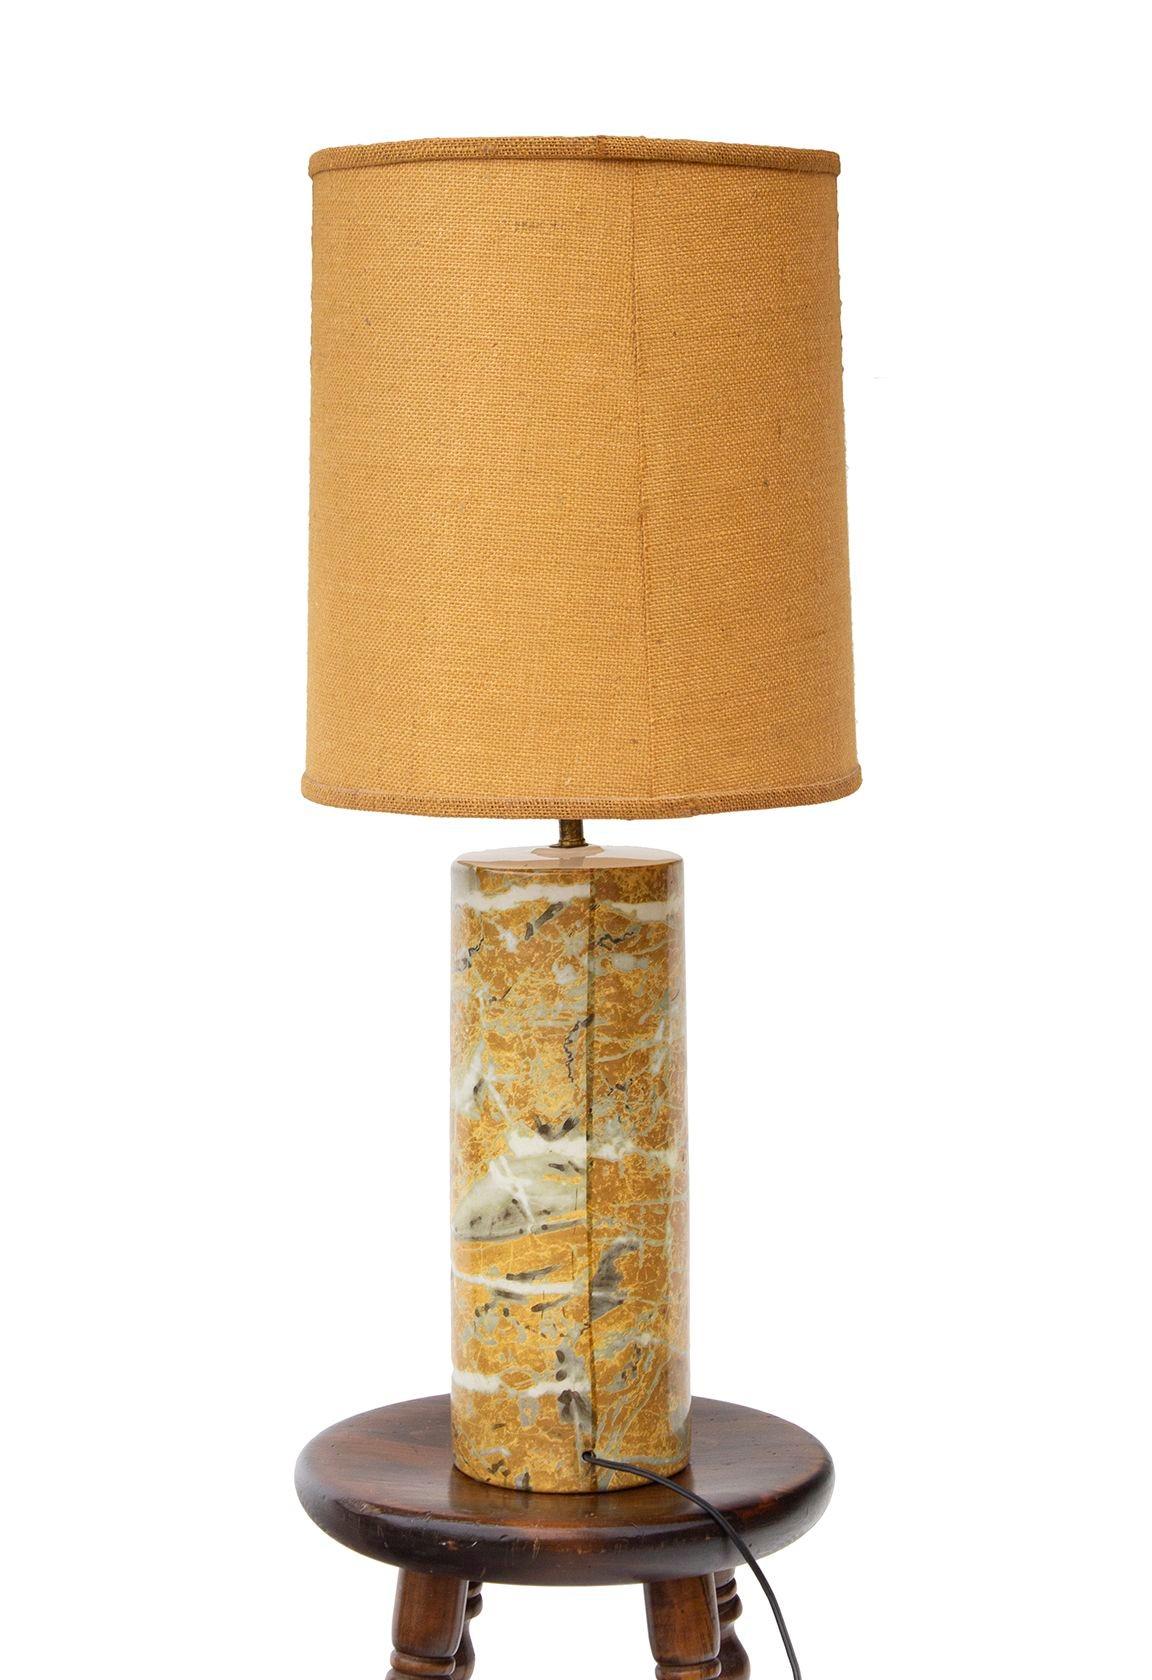 Late 20th Century Cylindrical Ceramic Table Lamp in Faux Marble with Tweed Shade For Sale